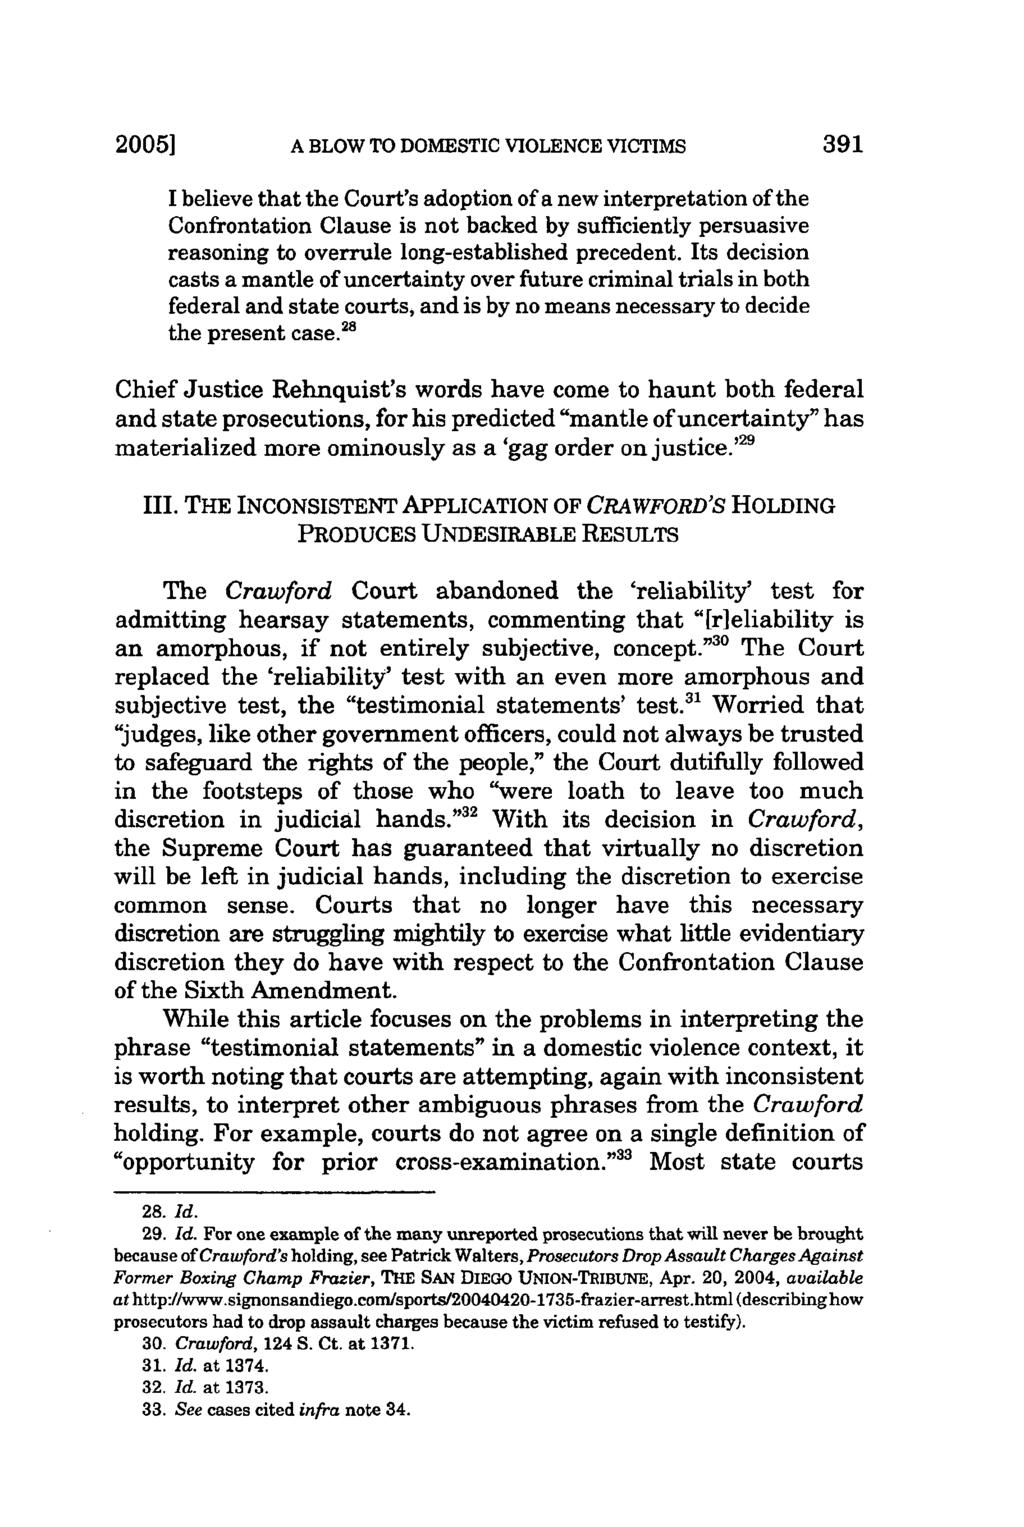 2005] A BLOW TO DOMESTIC VIOLENCE VICTIMS I believe that the Court's adoption of a new interpretation of the Confrontation Clause is not backed by sufficiently persuasive reasoning to overrule